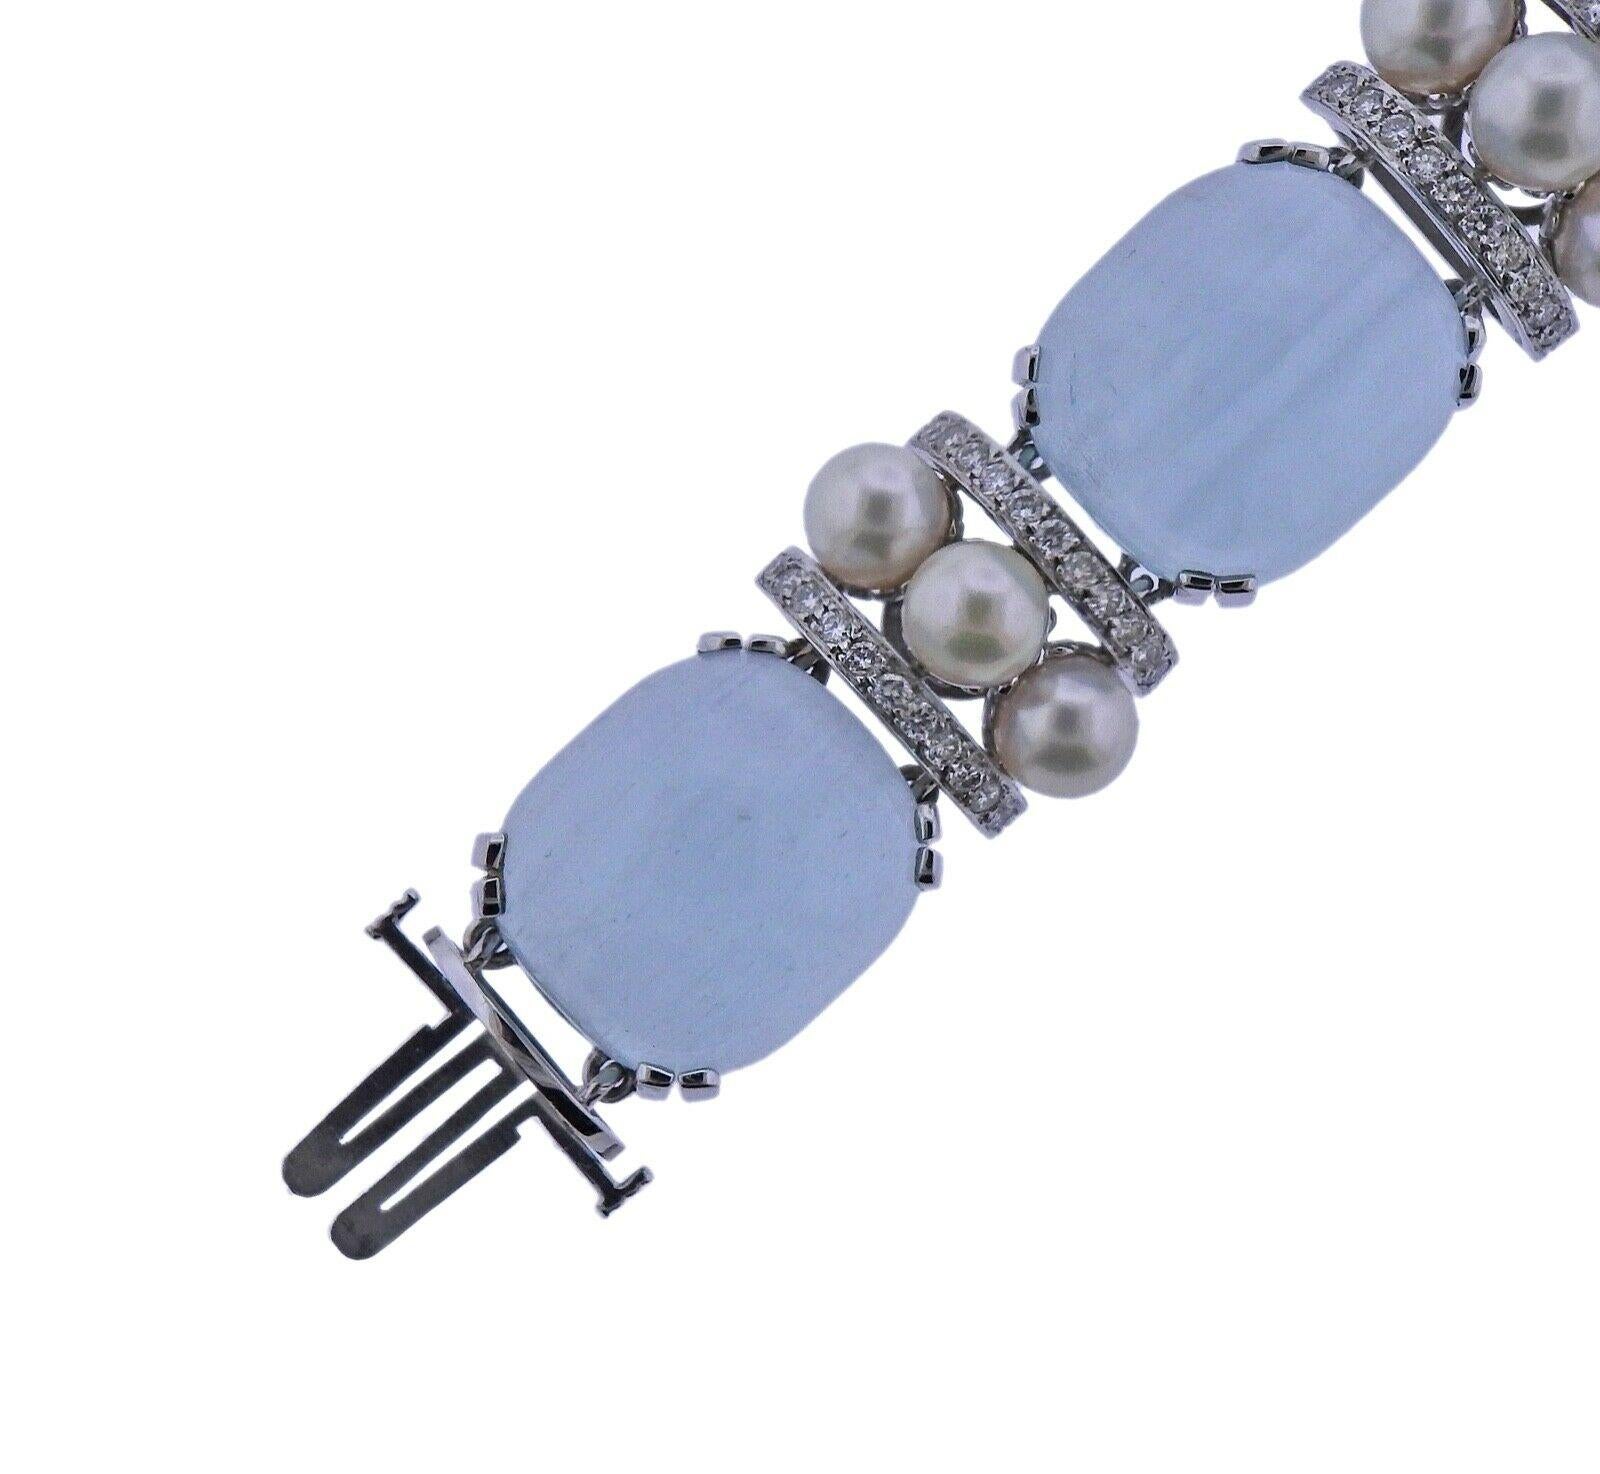 18k white gold bracelet by Seaman Schepps, set with approx. 2.00ctw in VS/G diamonds, 7.2mm pearls, and aquamarine cabochons. Bracelet measures 7 1/4 inches long, approx 19mm wide. Marked - Seaman Schepps 750 P9767. Weight -89.1 grams. 